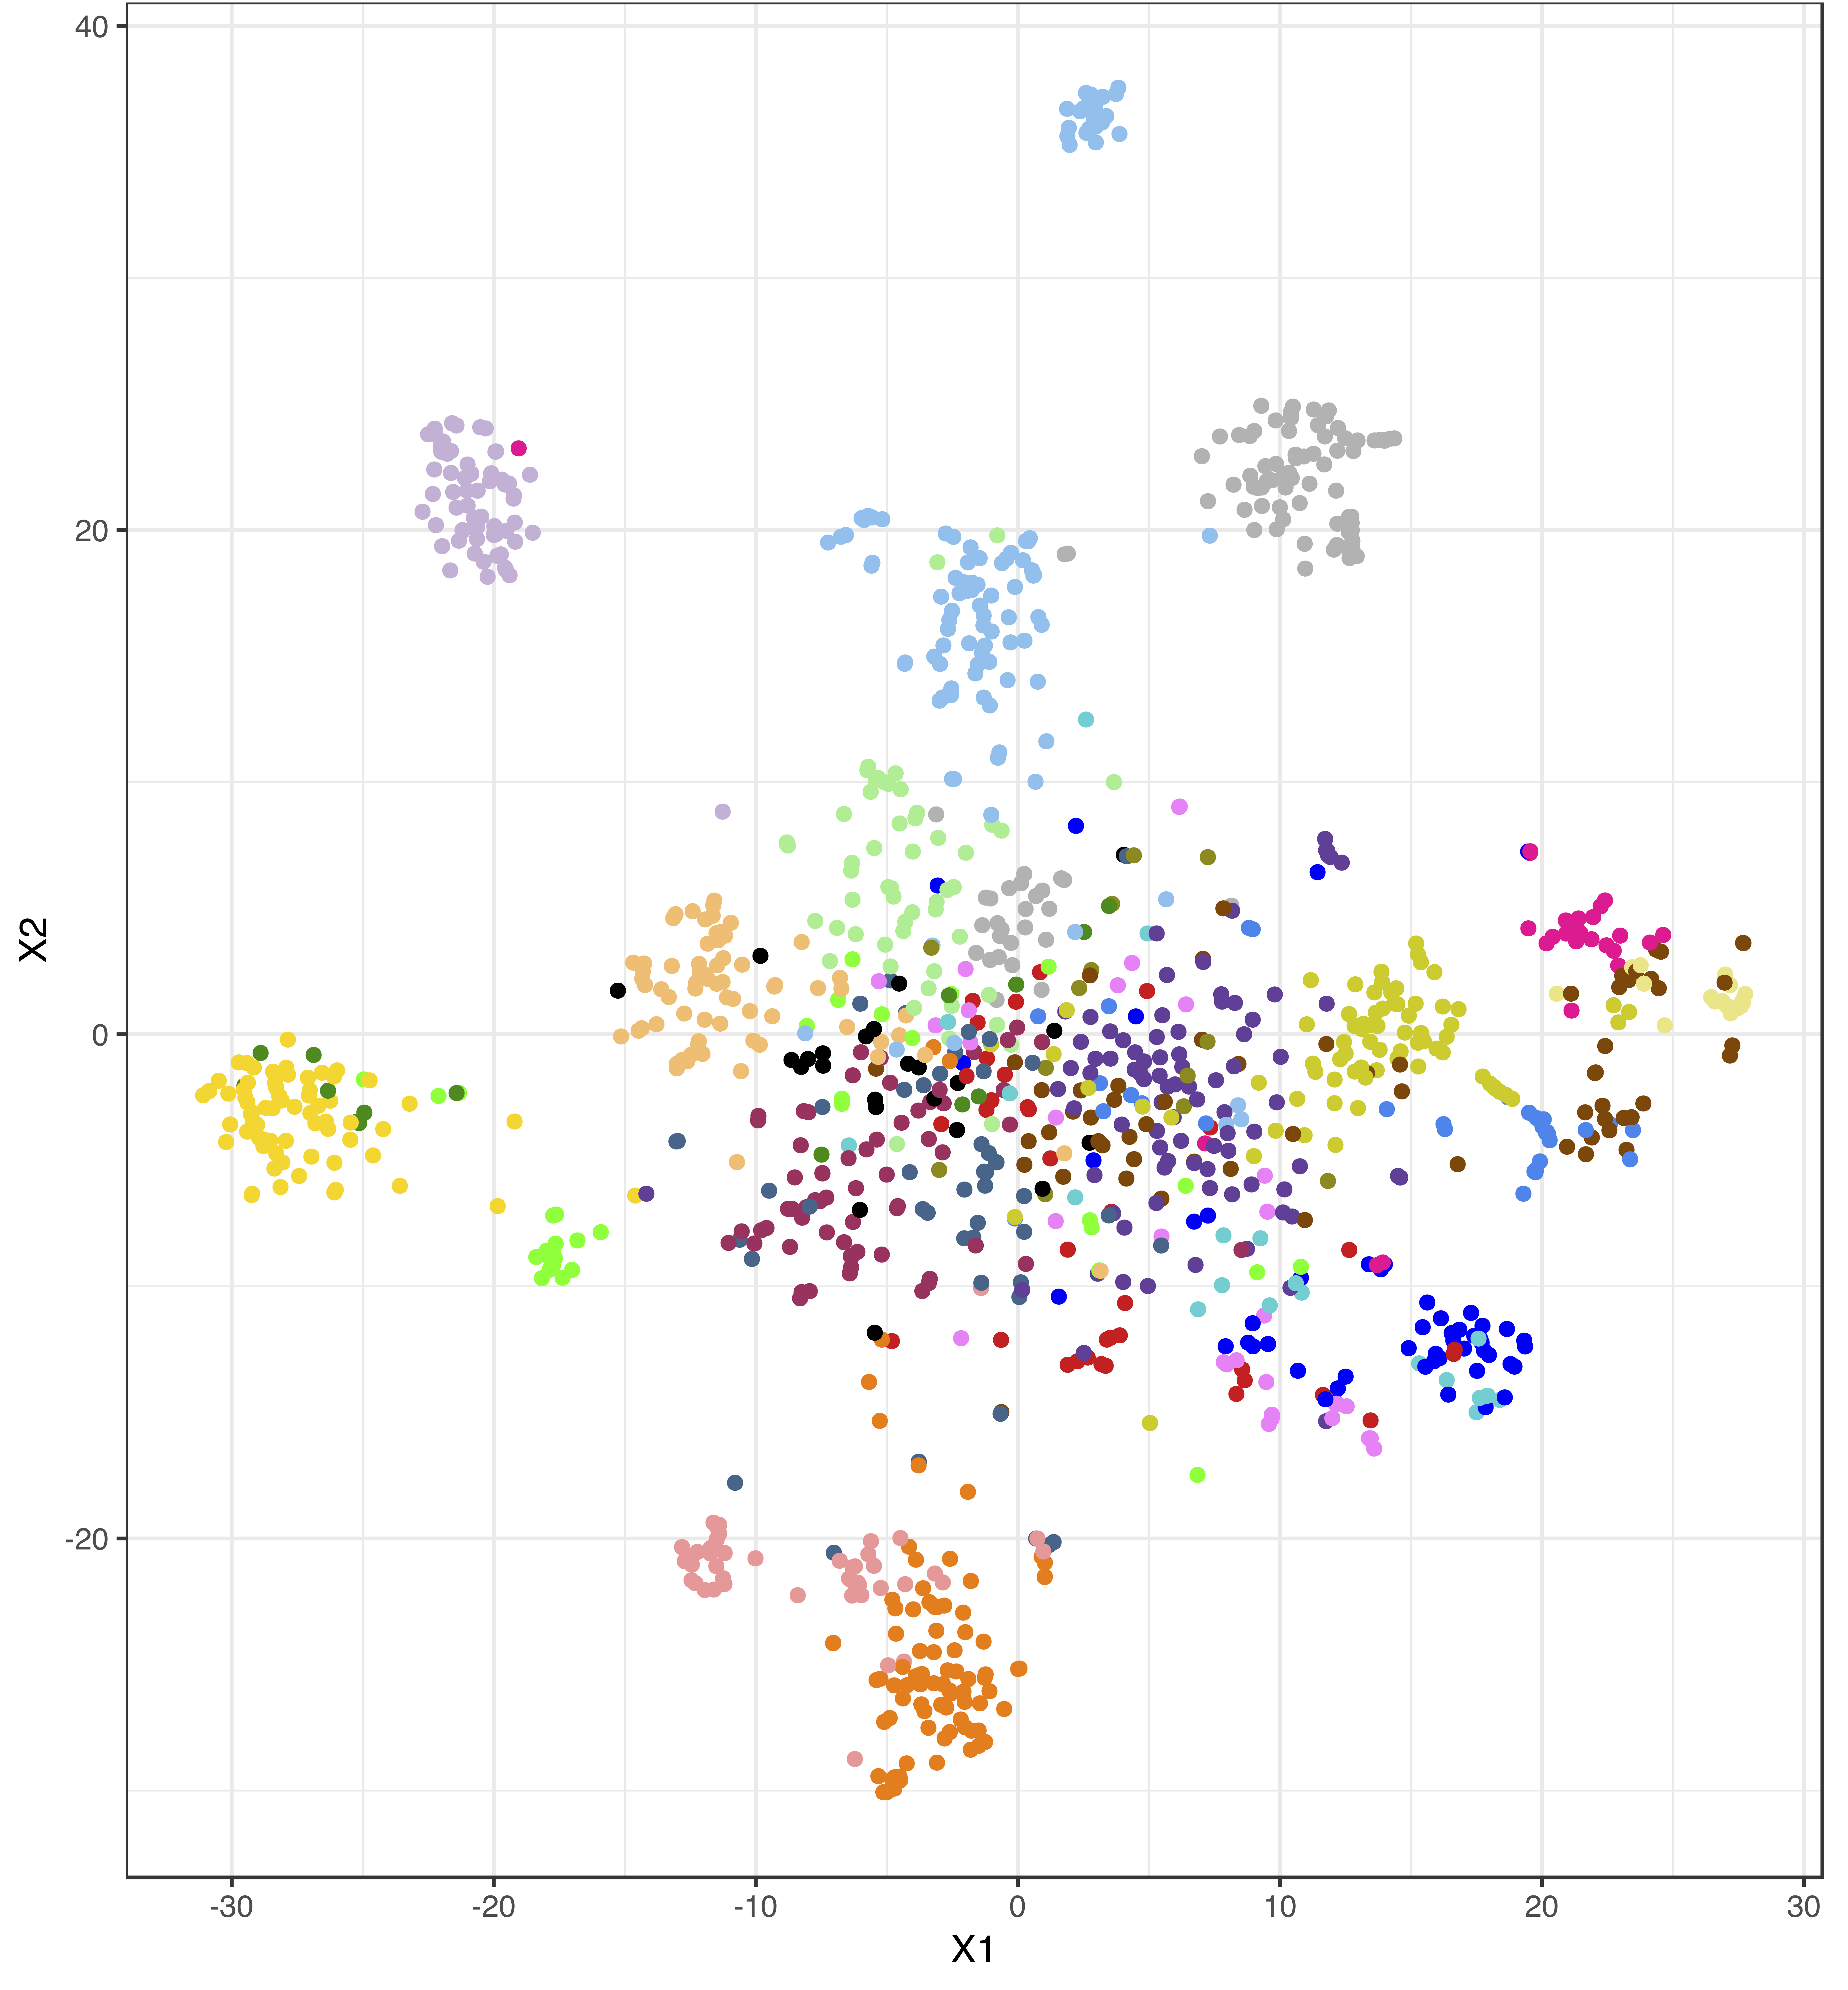 Metagenes 2D tSNE landscape, parameters testing. 2D visualization with tSNE was tested with different perplexity parameters. The component types in the middle of the plot are not well separated.